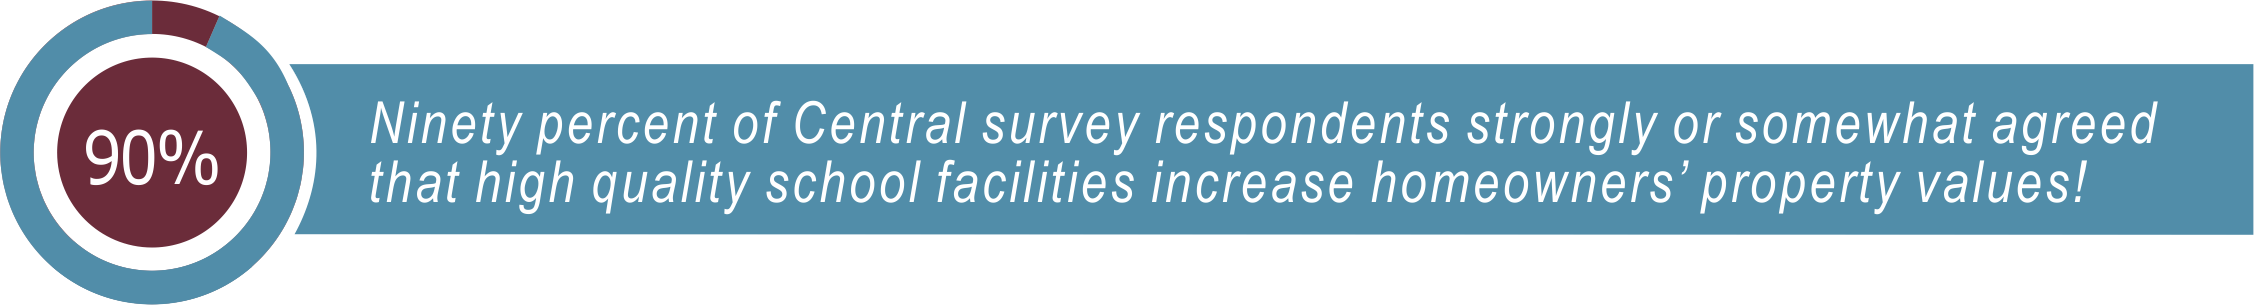 Ninety percent of Central survey respondents strongly or somewhat agreed that quality school facilities increase homeowners' property values